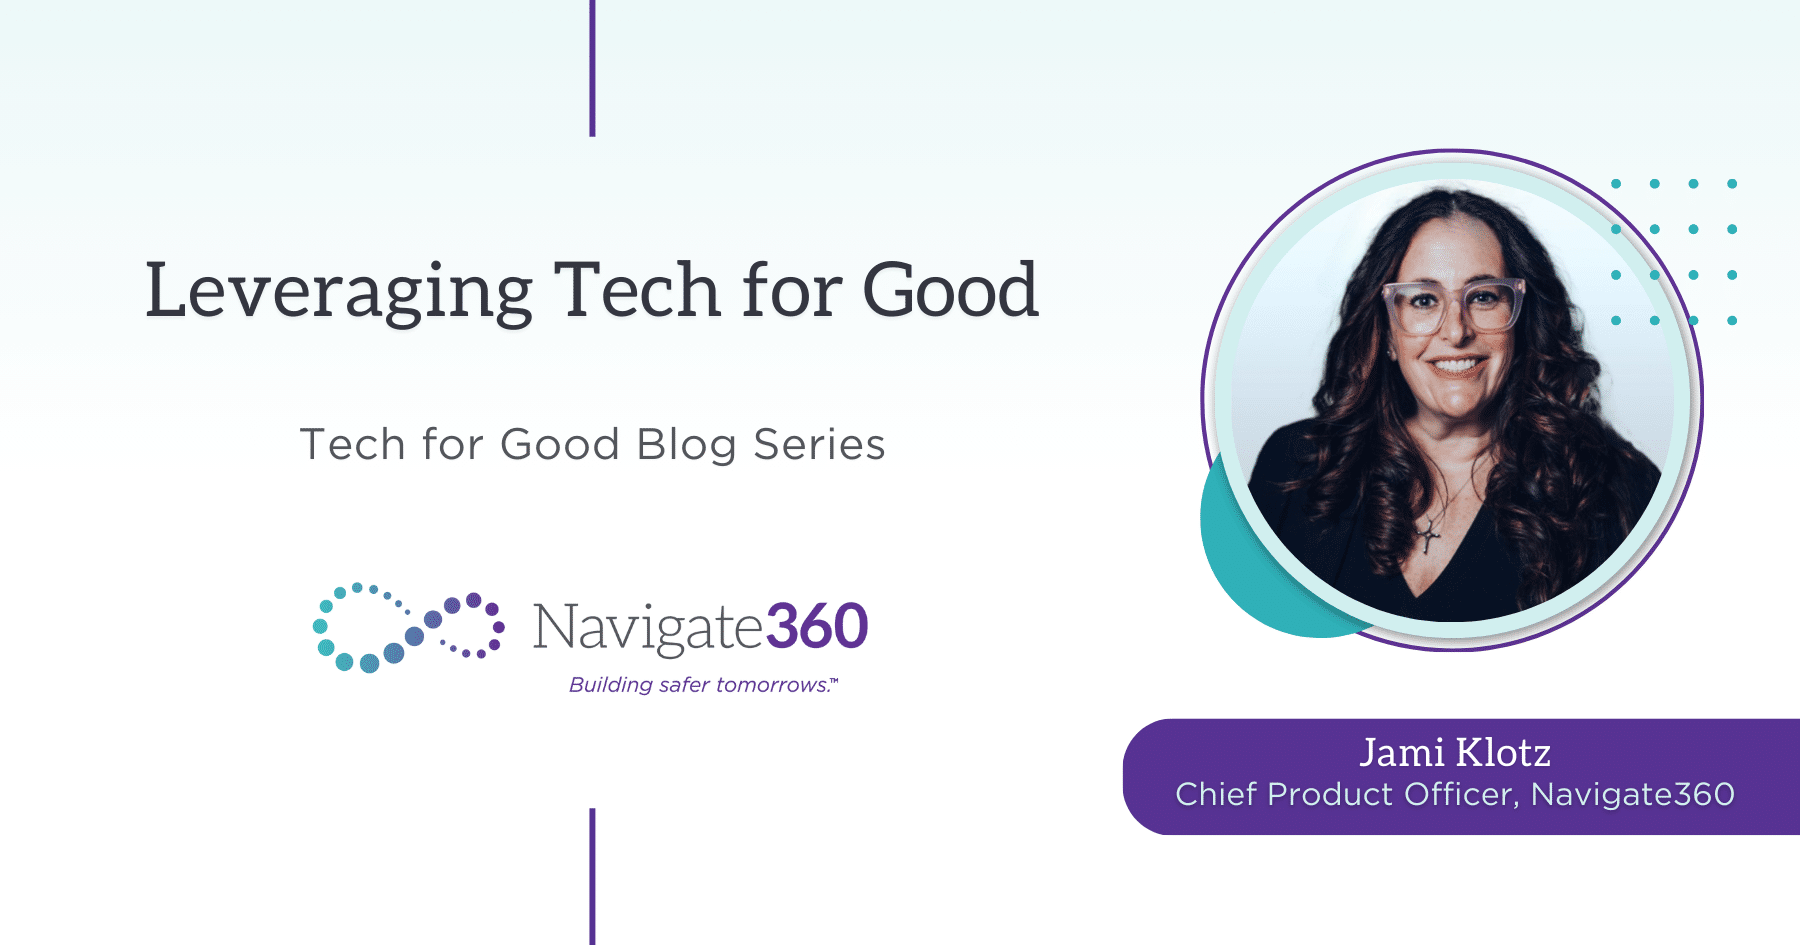 Leveraging Tech for Good